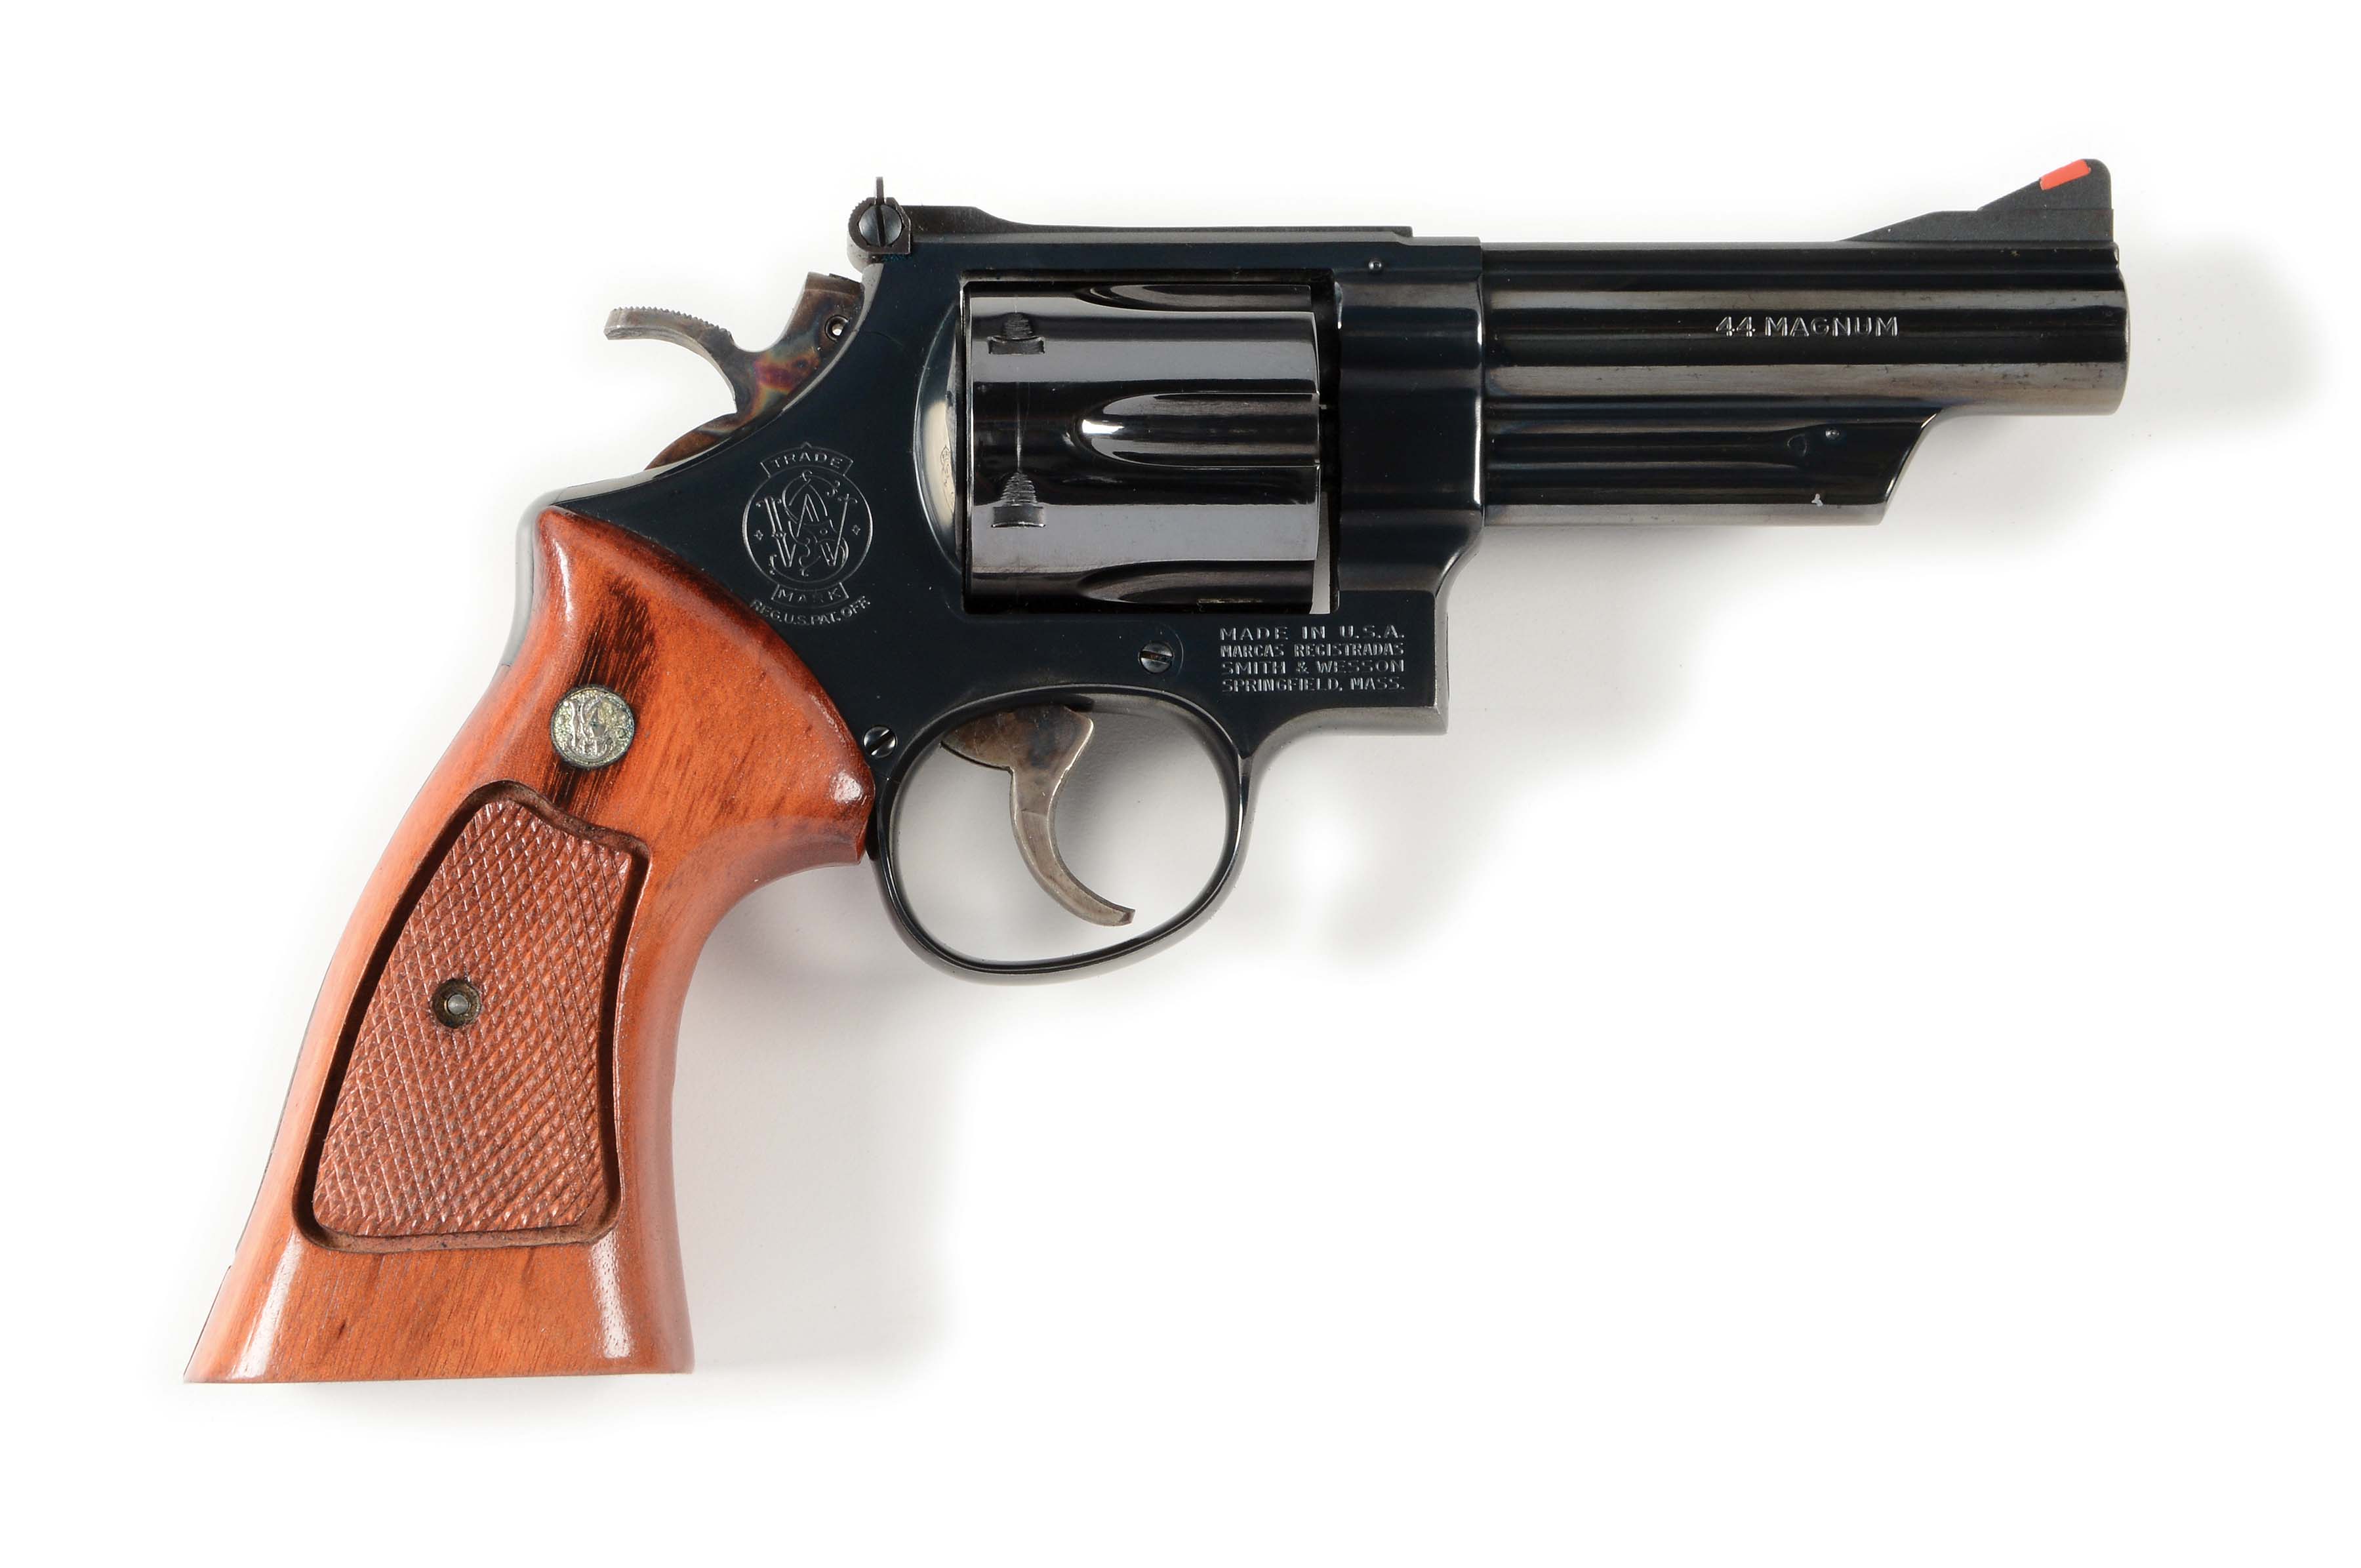 M) CASED SMITH & WESSON MODEL 29-2 DOUBLE ACTION REVOLVER 